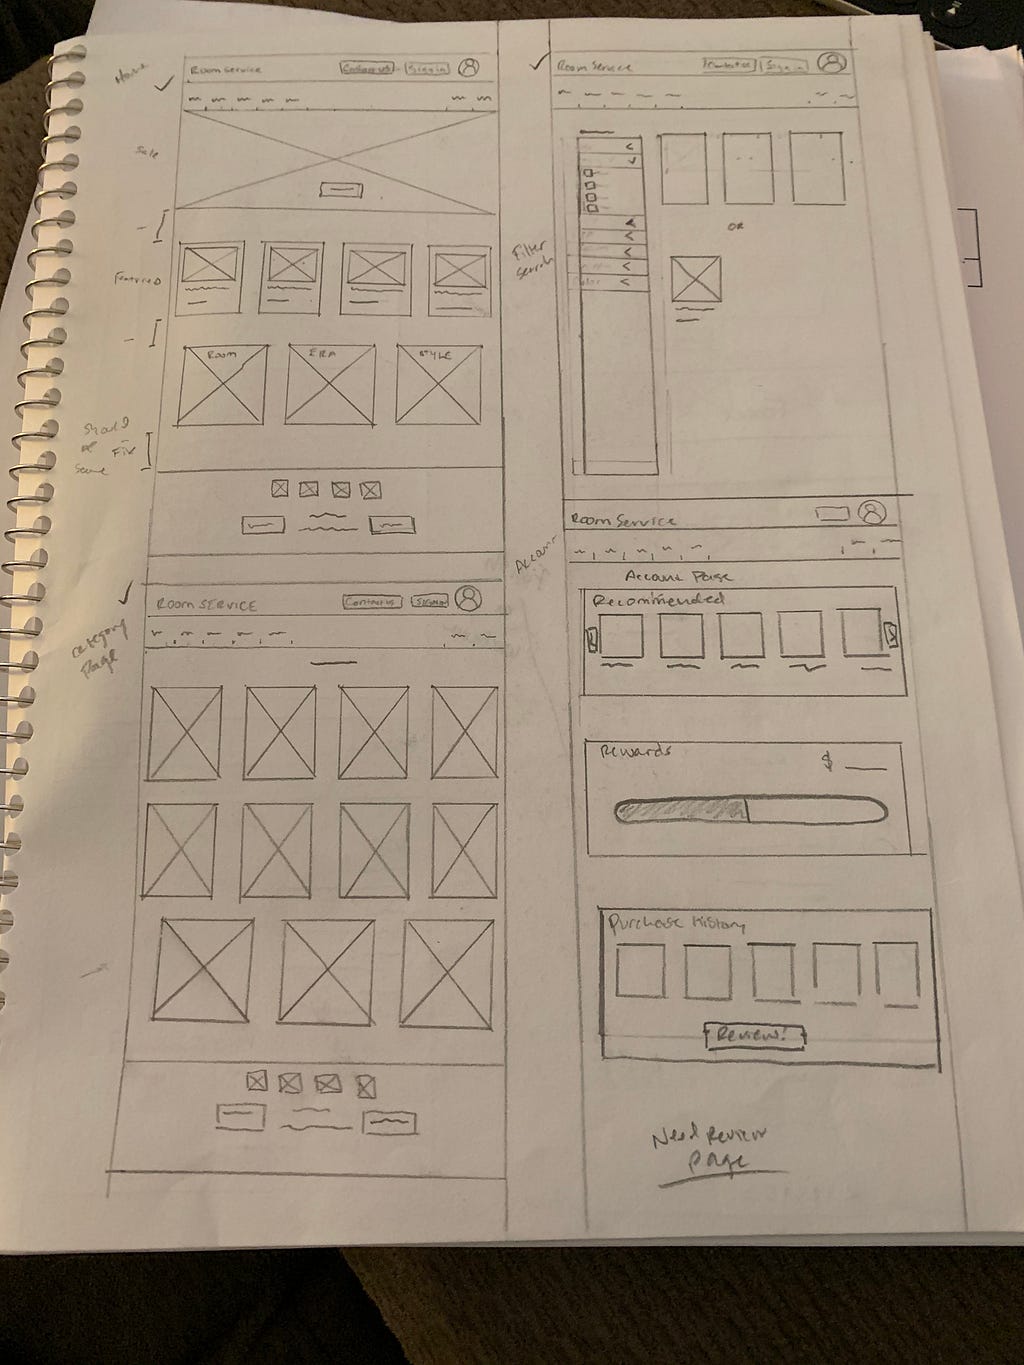 A hand drawn wireframe is shown